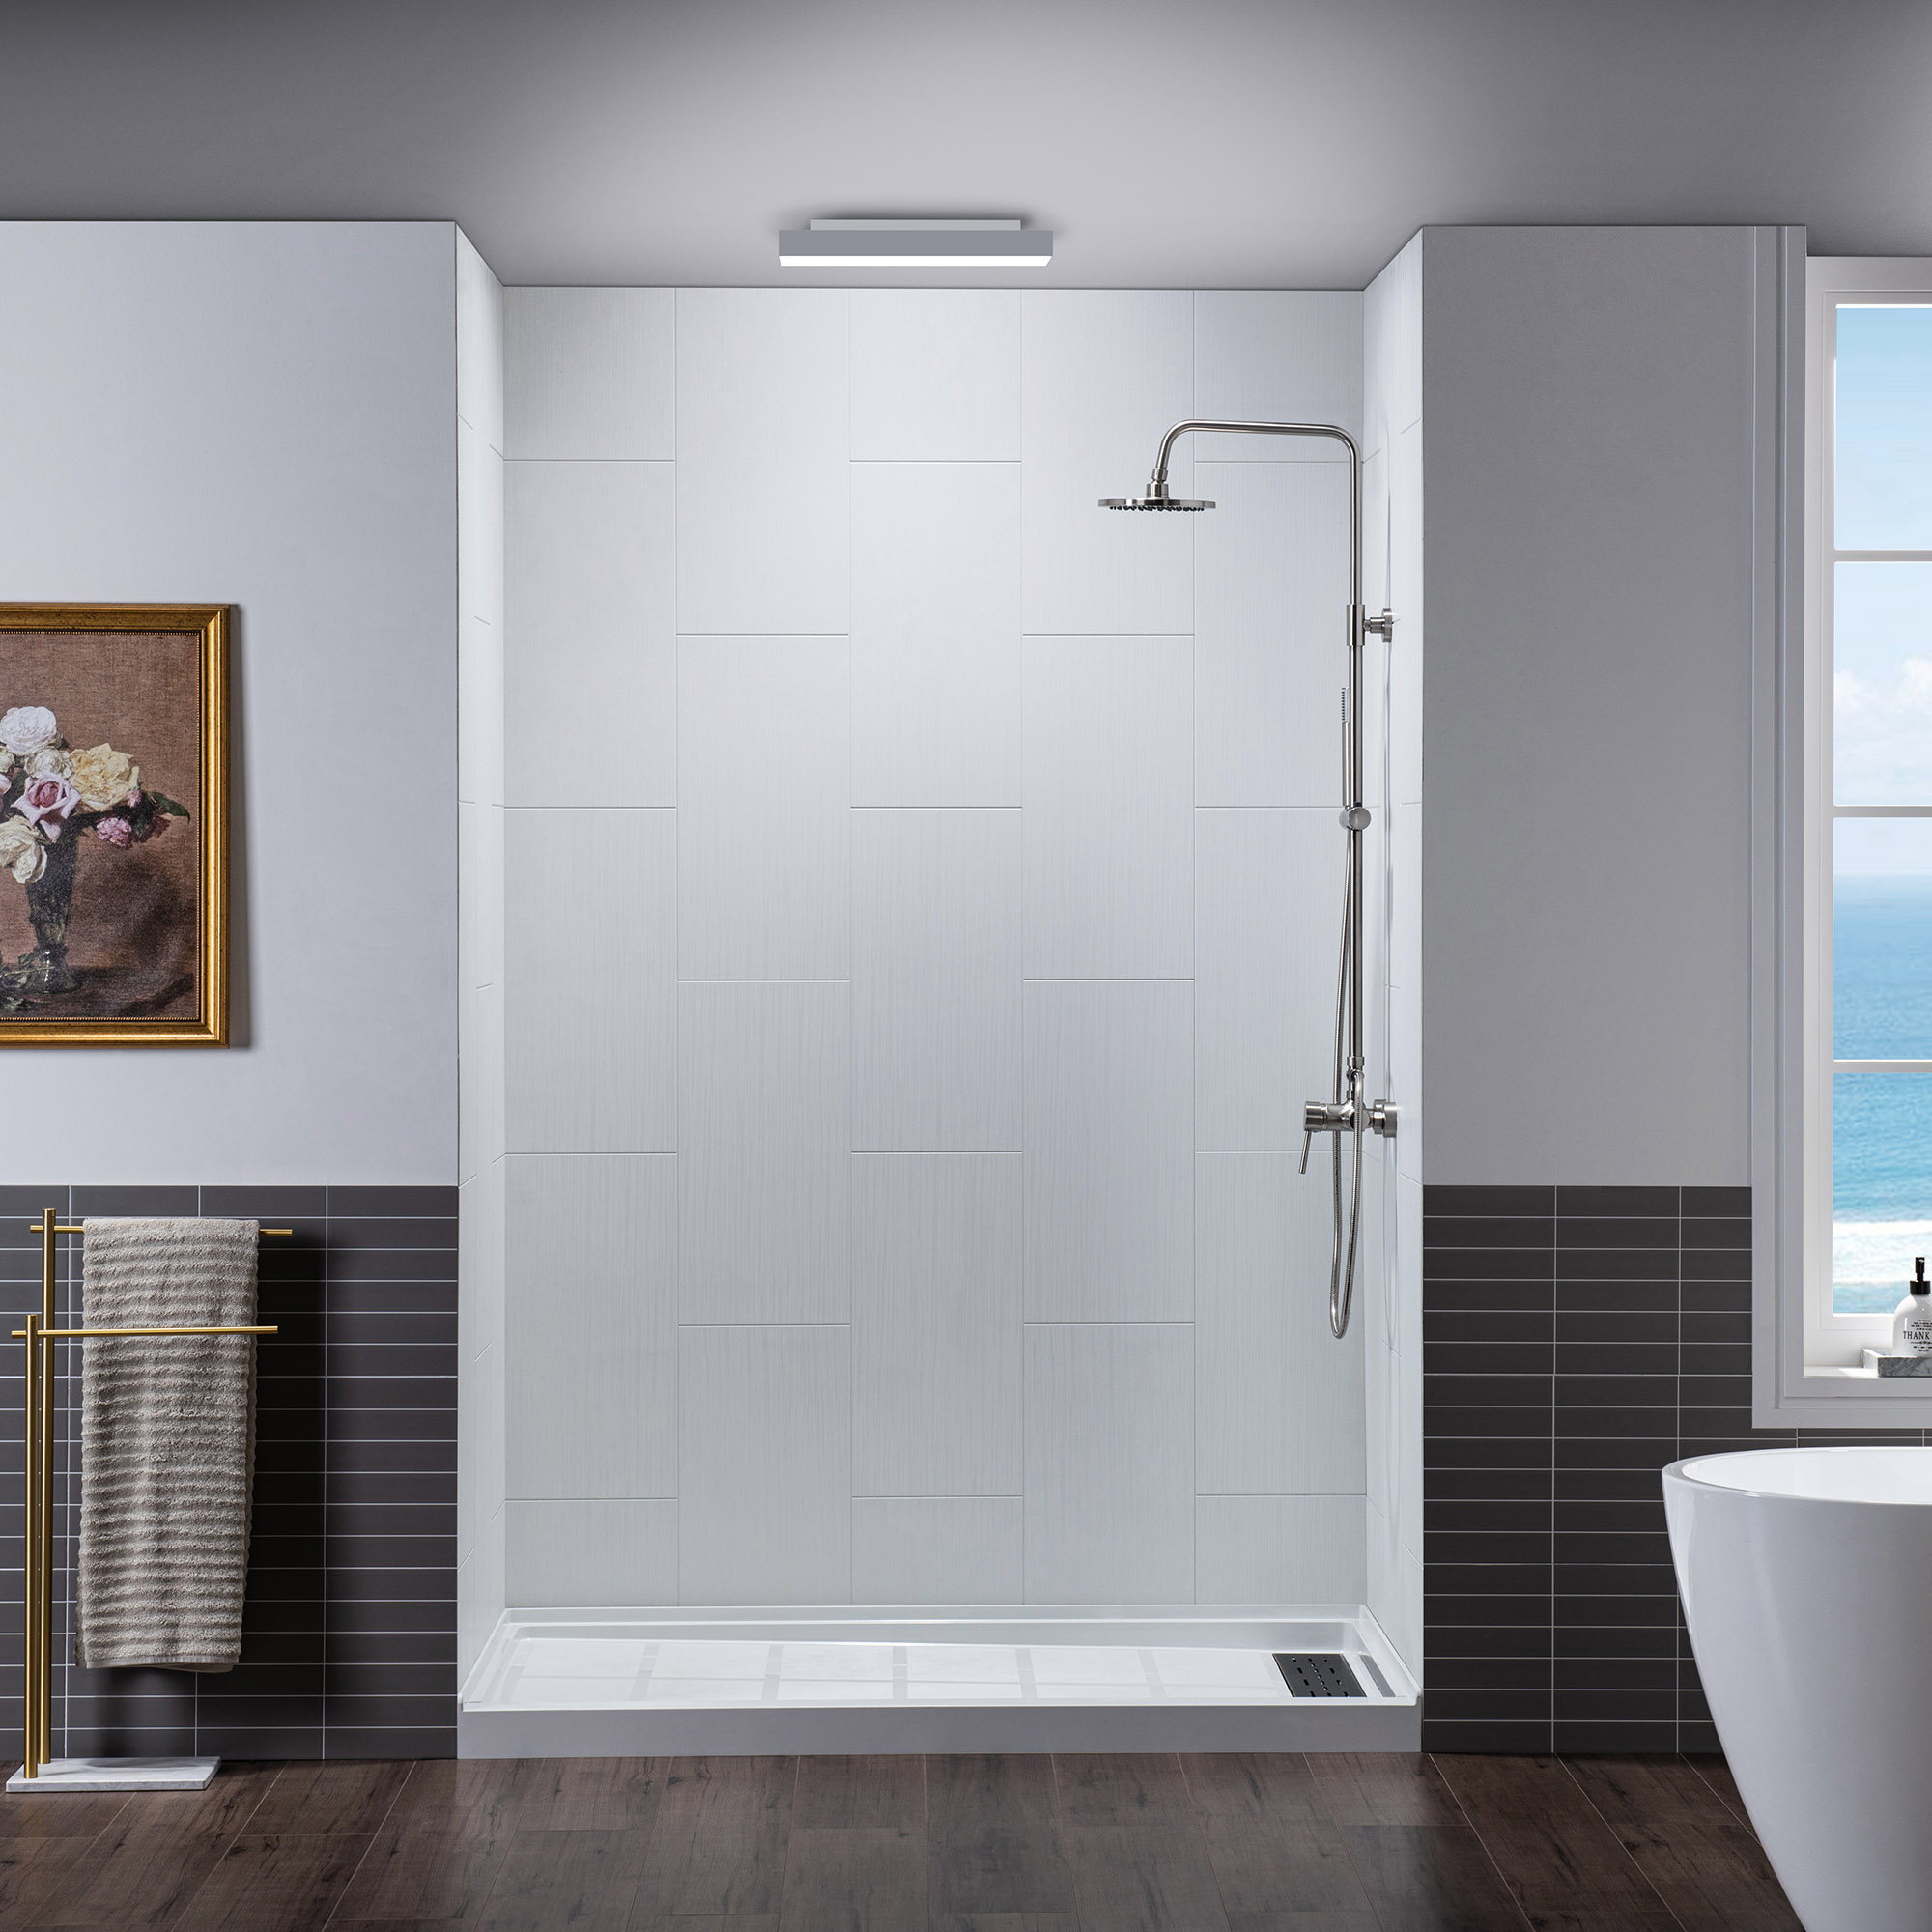  WOODBRIDGE  Solid Surface 3-Panel Shower Wall Kit, 32-in L x 60-in W x 75-in H, Stacked block in a staggered vertical pattern.  Matte Finish, White_11742